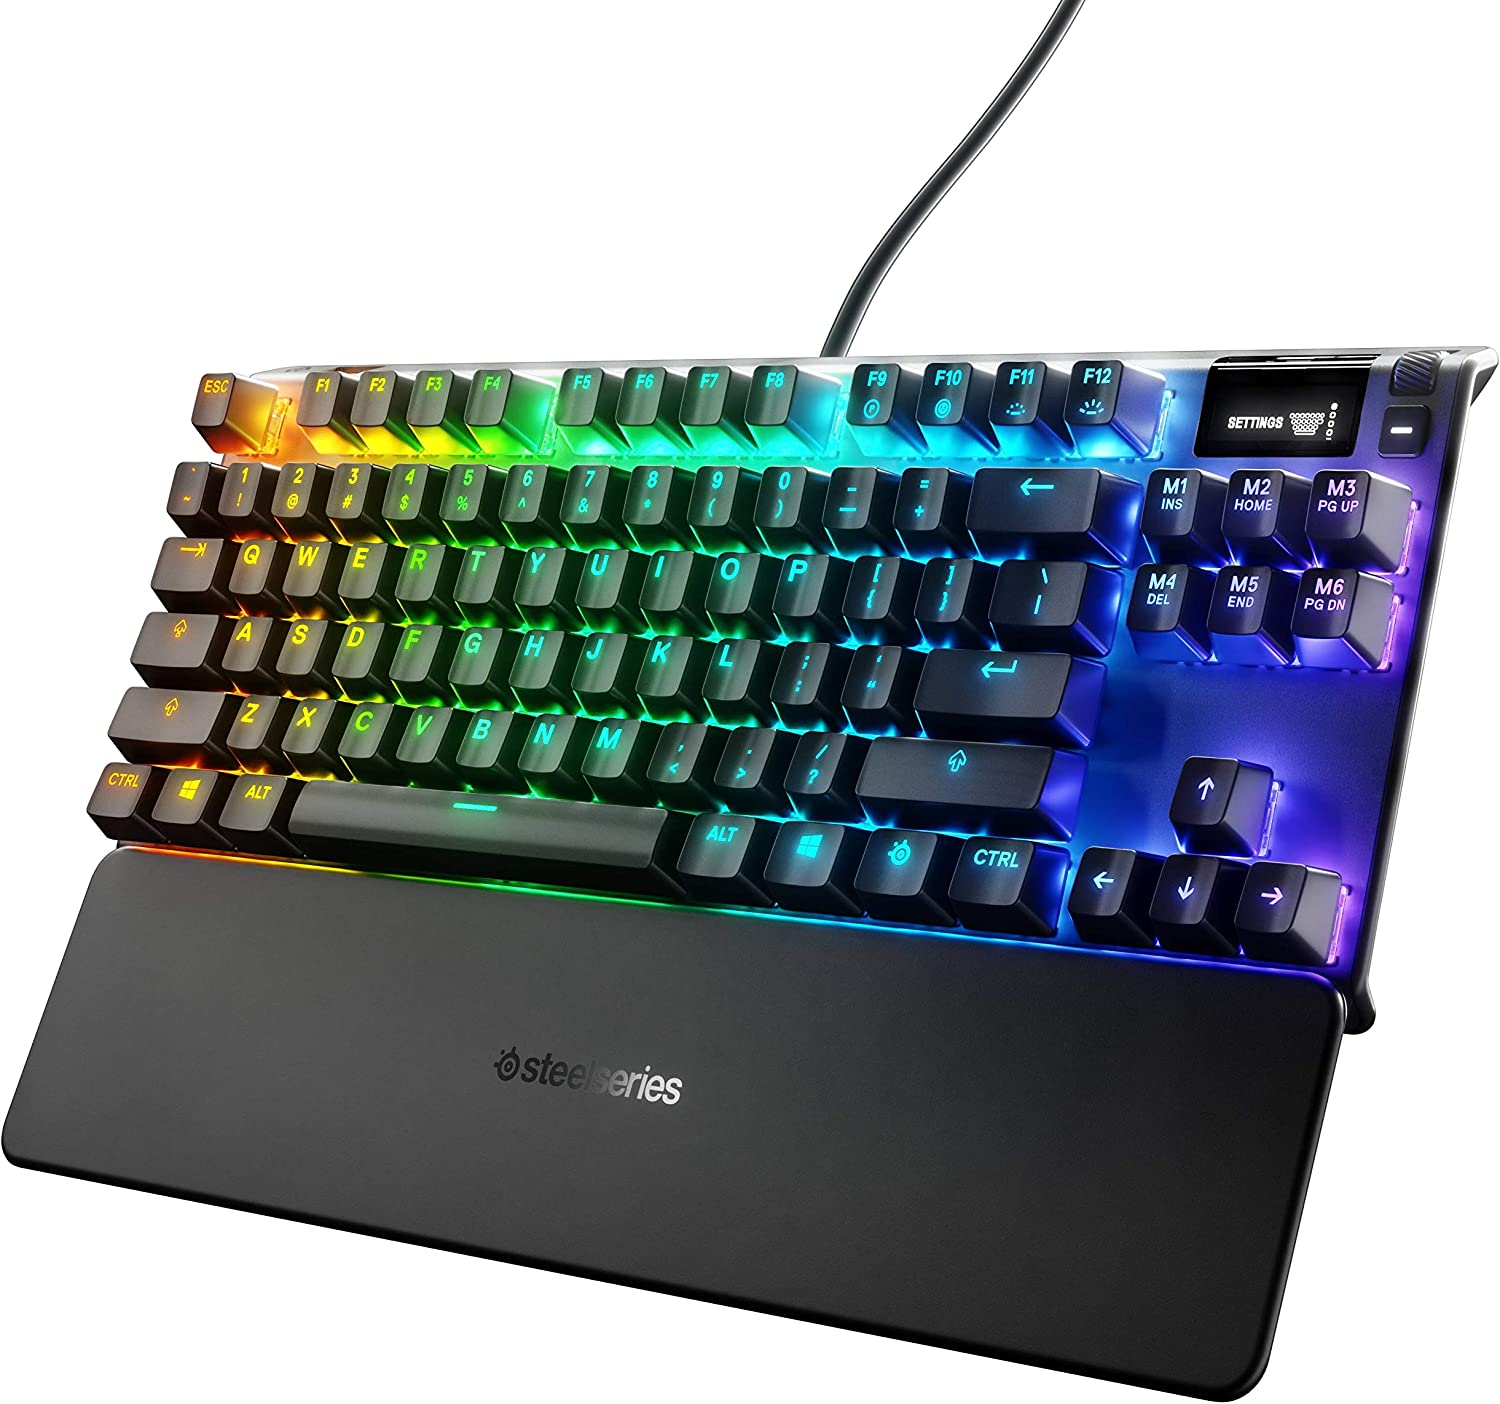 Gaming keyboards are designed to withstand rough key presses and are more durable than regular keyboards.